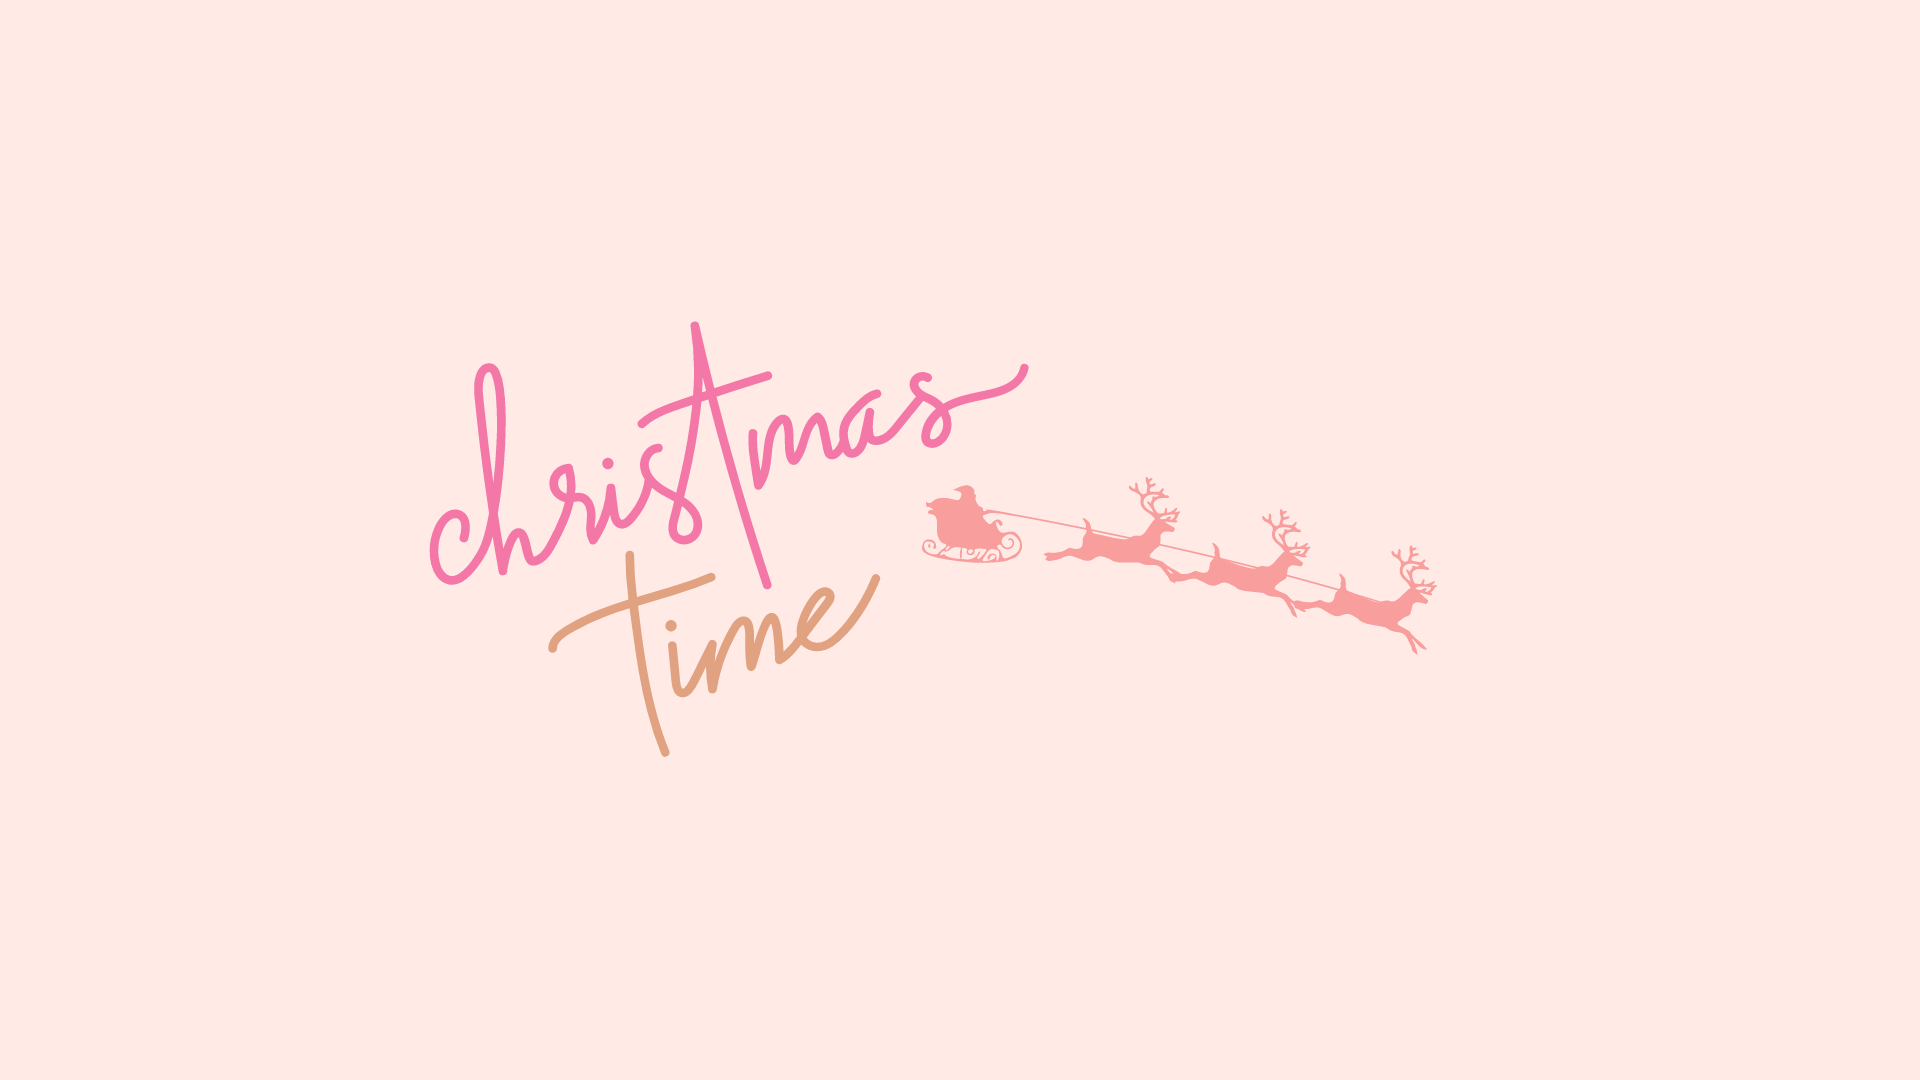 A light pink background with the words Christmas Time written in a similar pink font. Below is a drawing of Santa Claus in a sleigh being pulled by reindeer. - Candy cane, cute Christmas